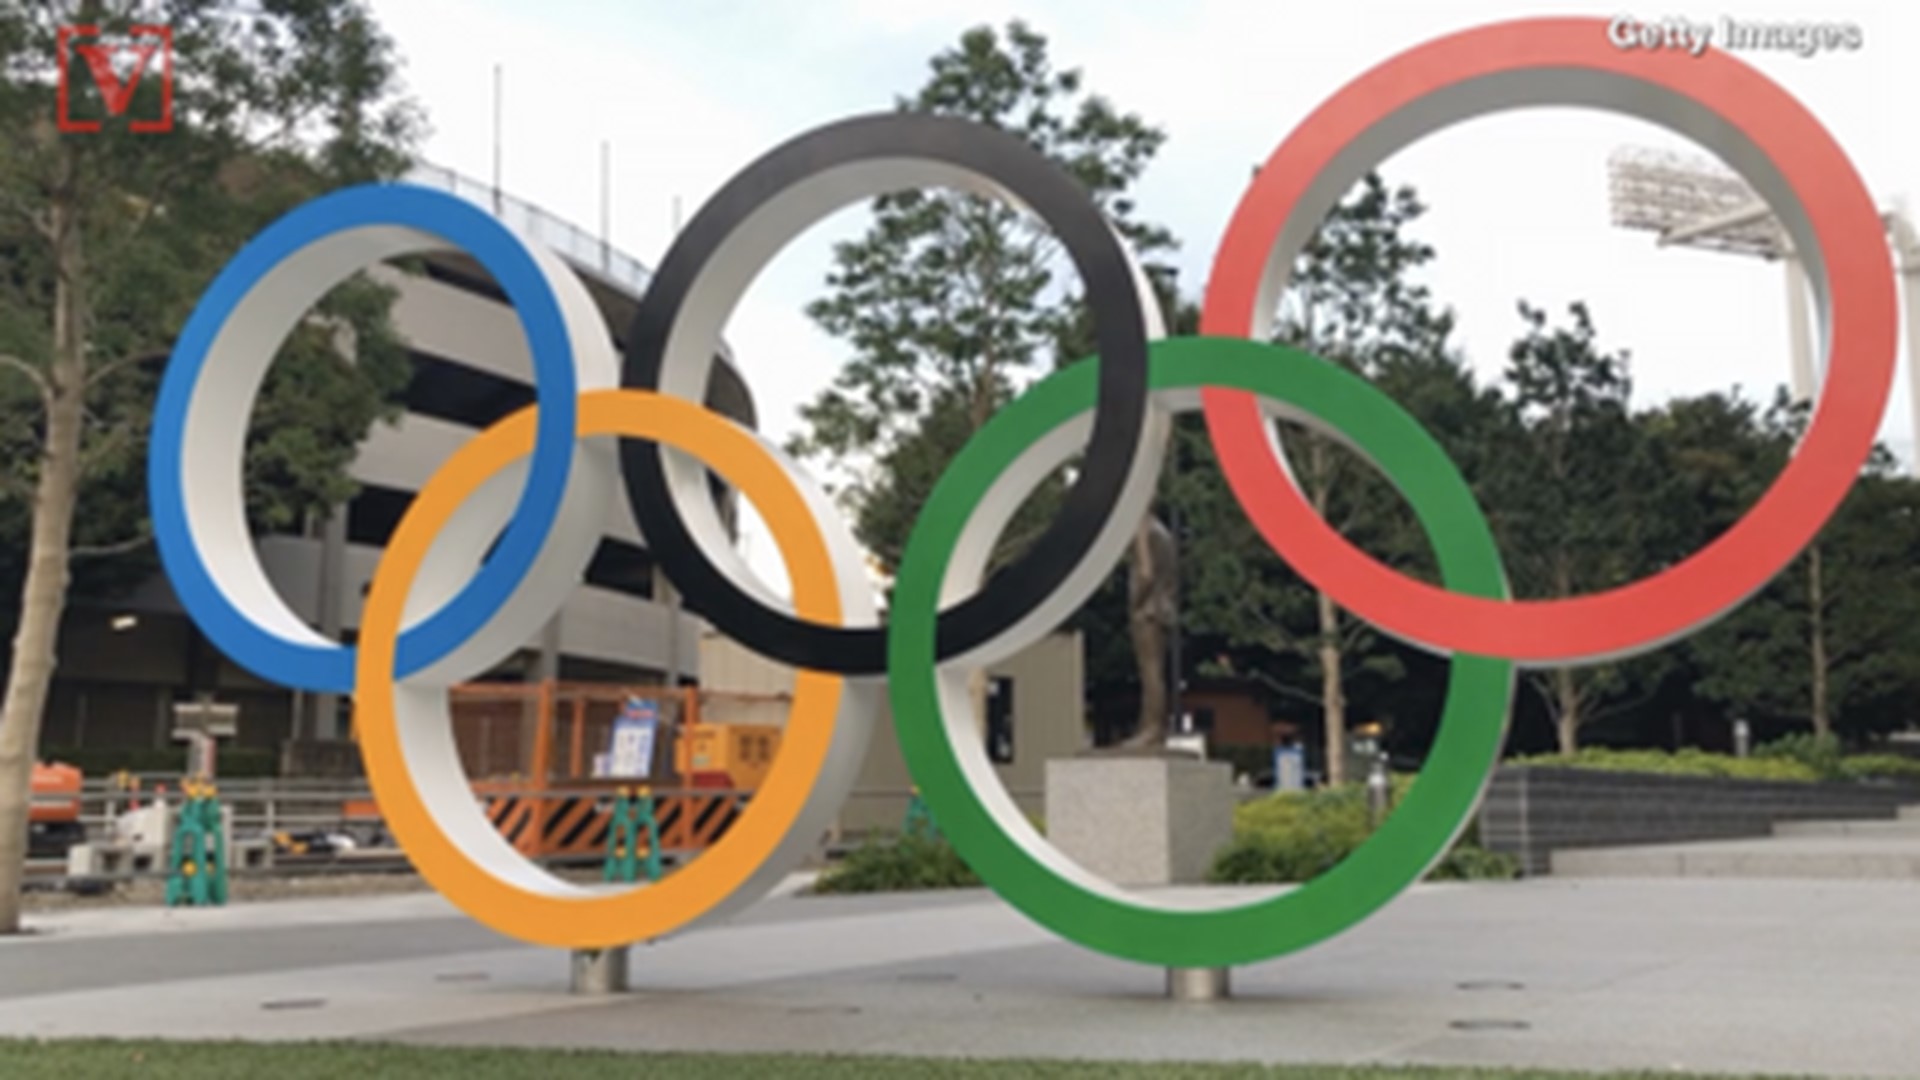 Getting tickets to the Olympics might be harder than ever for Tokyo 2020, unless you're a local who can afford to foot the bill for an upscale hospitality package. Veuer's Nick Cardona has more.